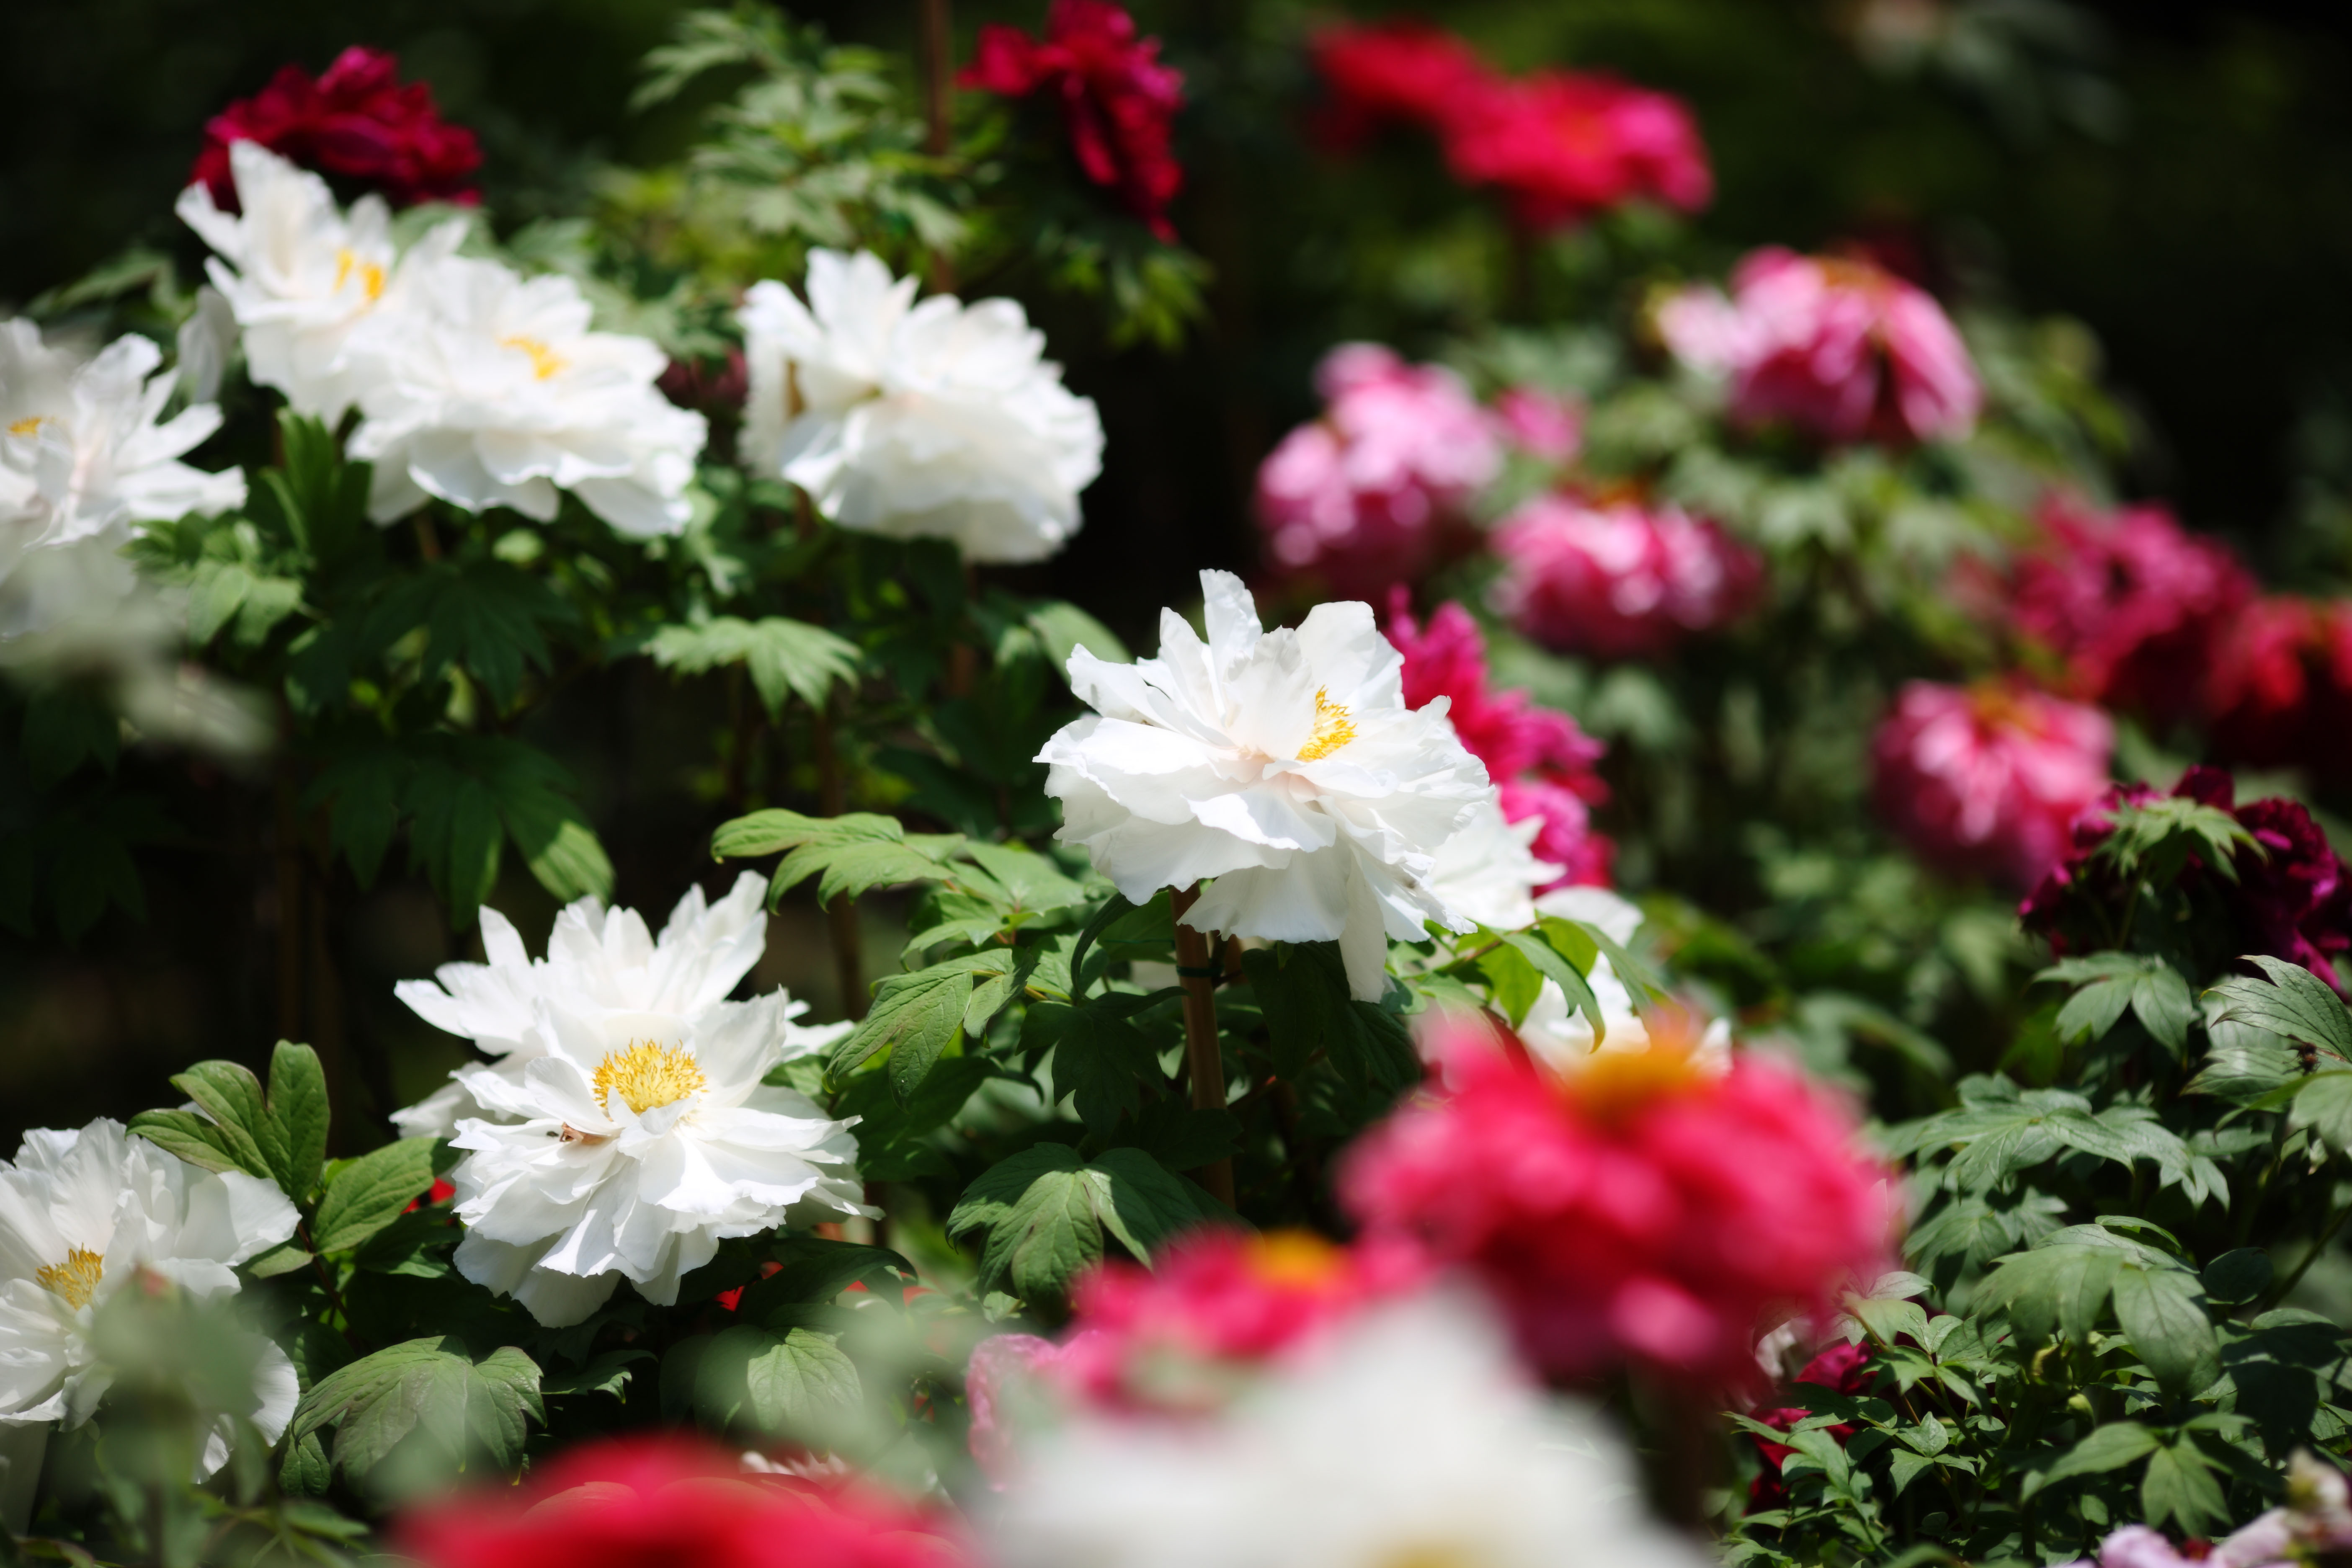 photo,material,free,landscape,picture,stock photo,Creative Commons,The peony of Hase-dera Temple, peony, button, , Mitera of the flower